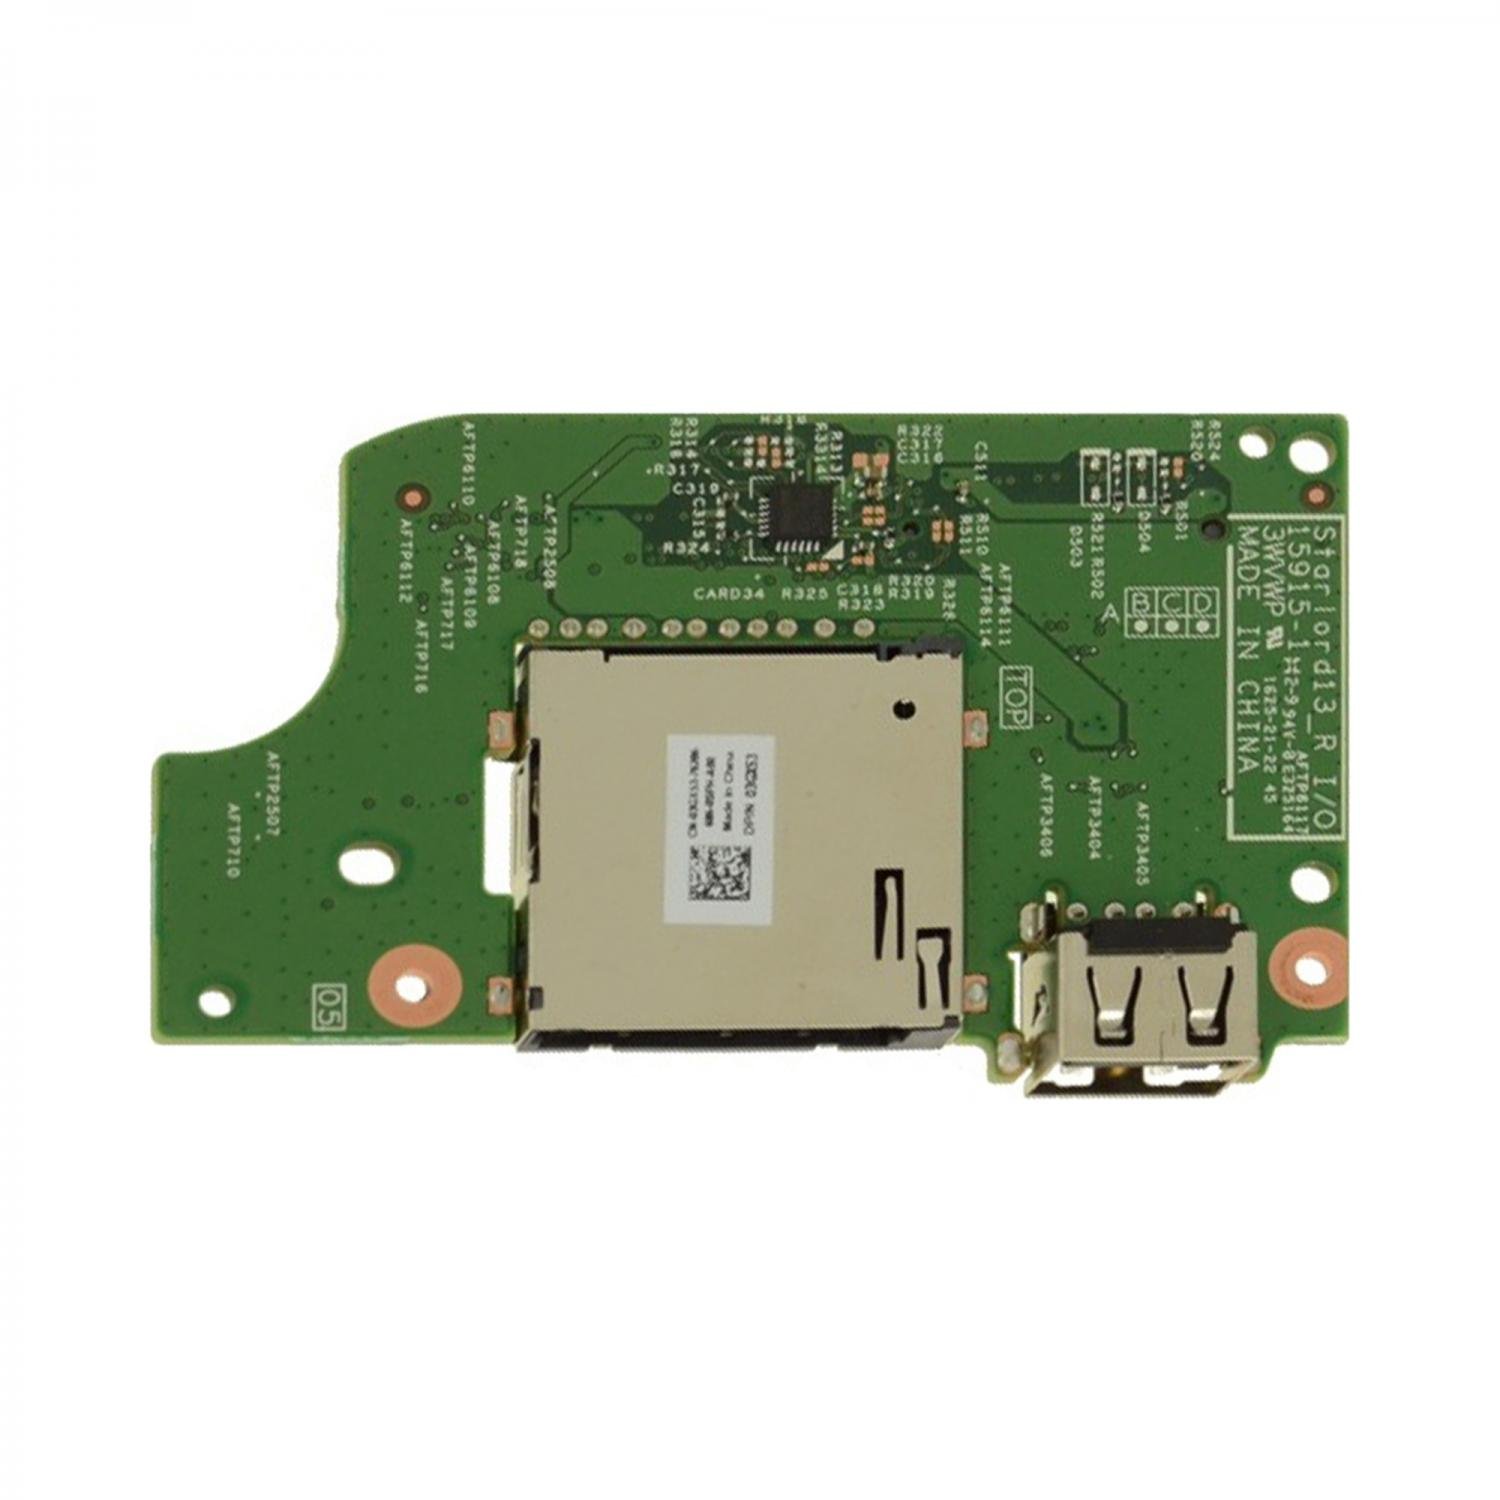 Dell Inspiron 15 5568 13 5368 5378 Latitude 3390 2-in-1 OEM IO Daughter Circuit Board with USB / SD Card Reader P/N 3GX53, 3WVWP